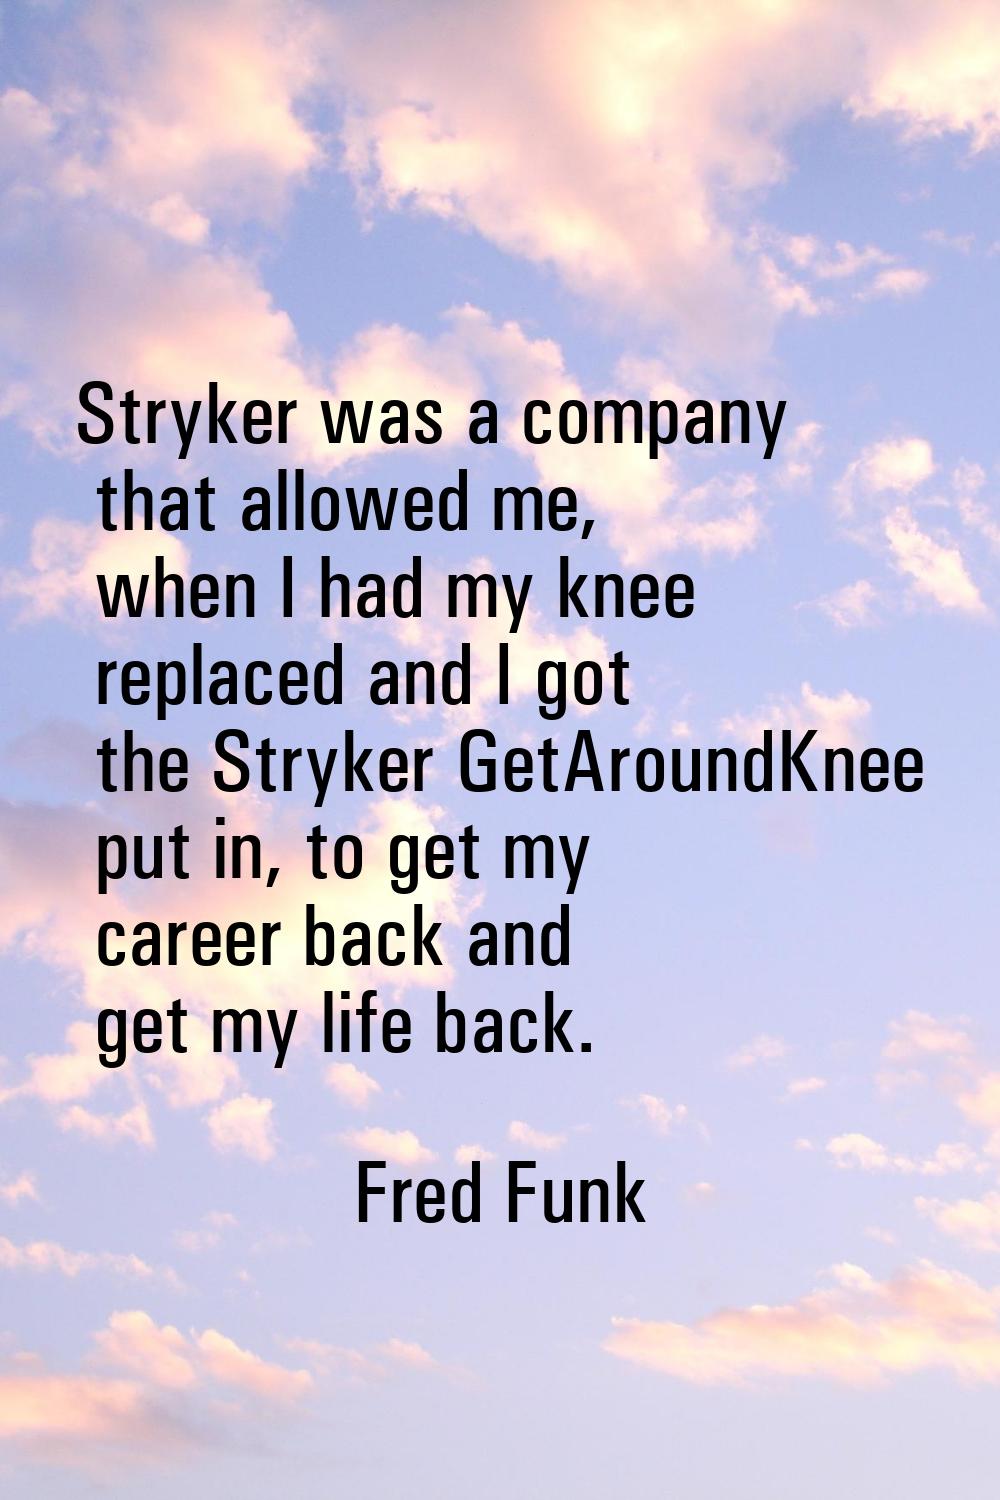 Stryker was a company that allowed me, when I had my knee replaced and I got the Stryker GetAroundK